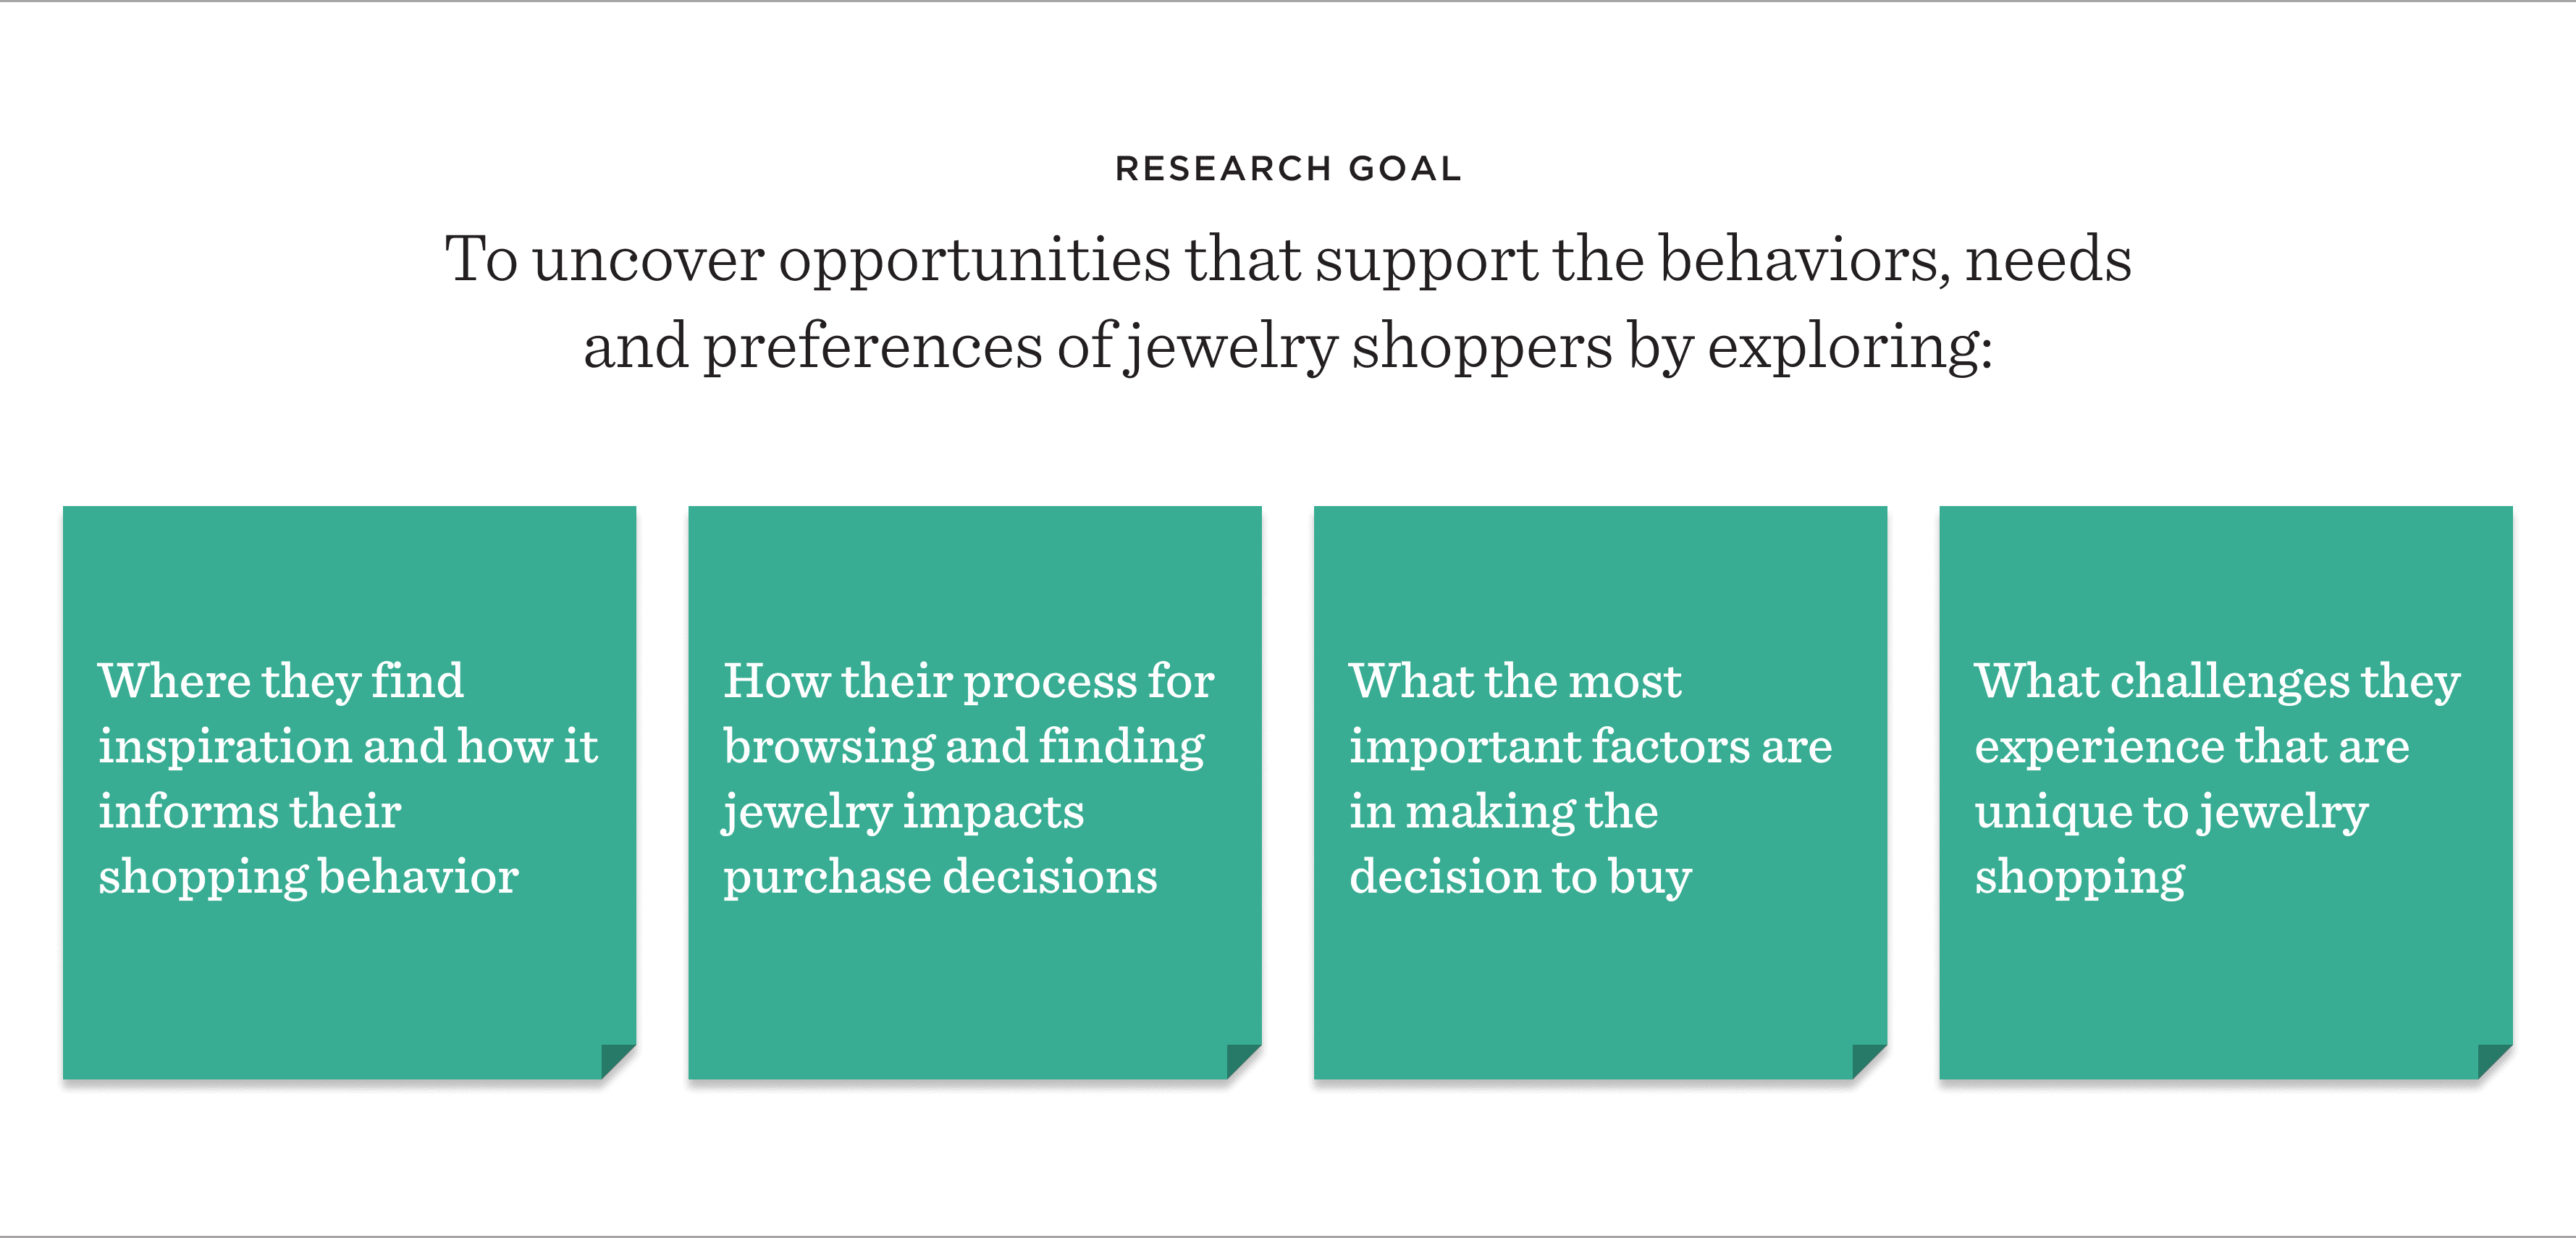 Our research goal is to understand jewelry consumers’ process for shopping for designer or vintage jewelry in order to uncover opportunities to better support their behaviors, needs and preferences.